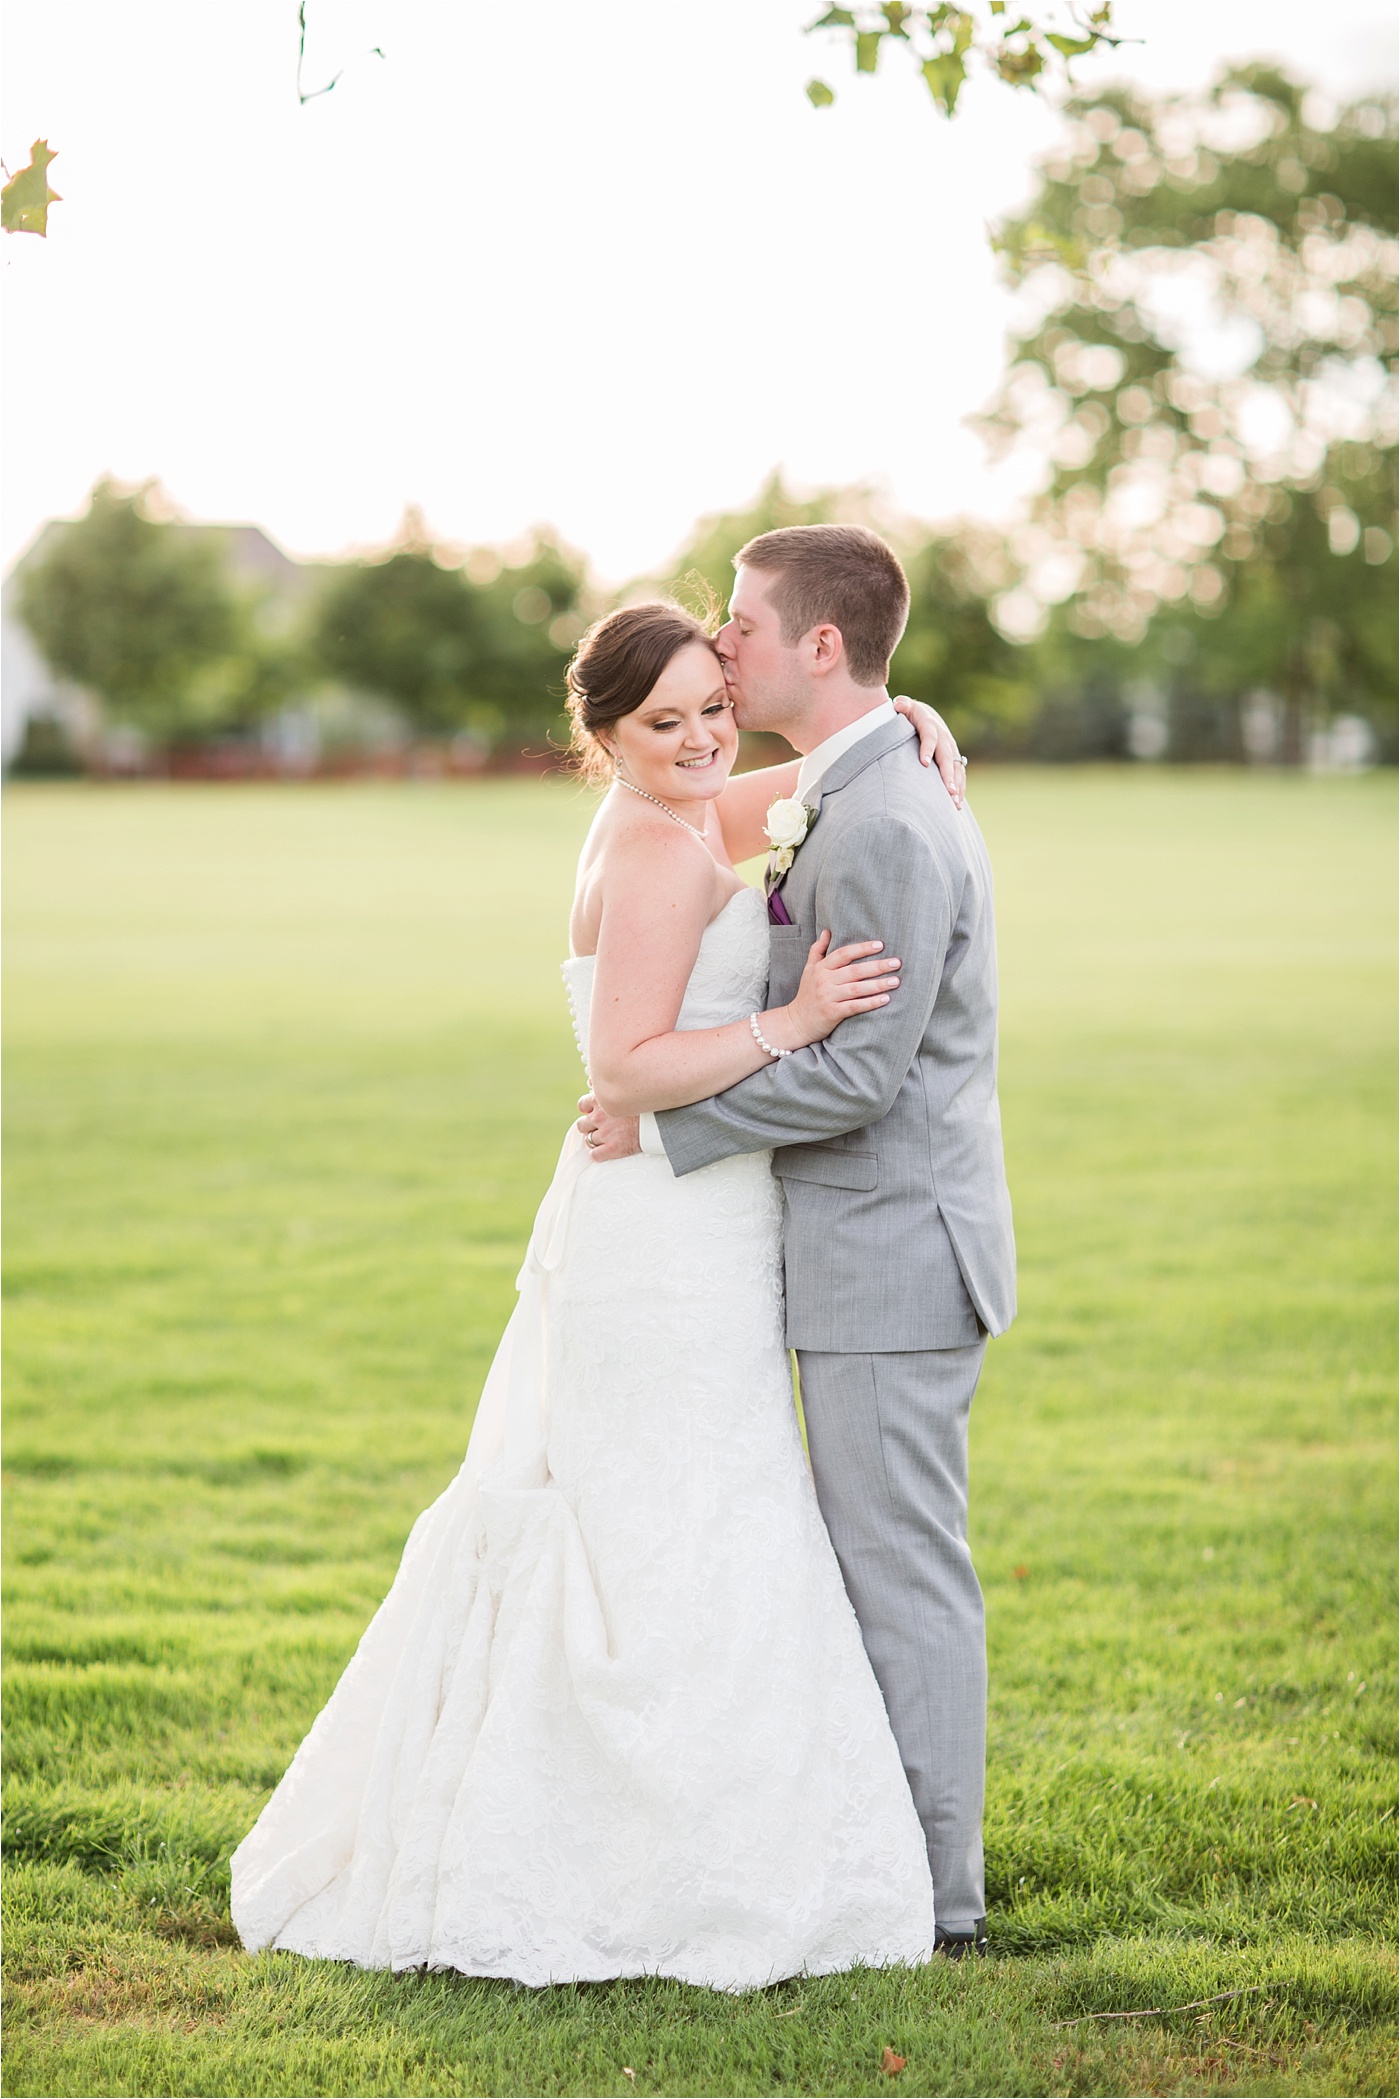 Lavender Summer Wedding at Scioto Reserve Country Club | KariMe Photography_0185